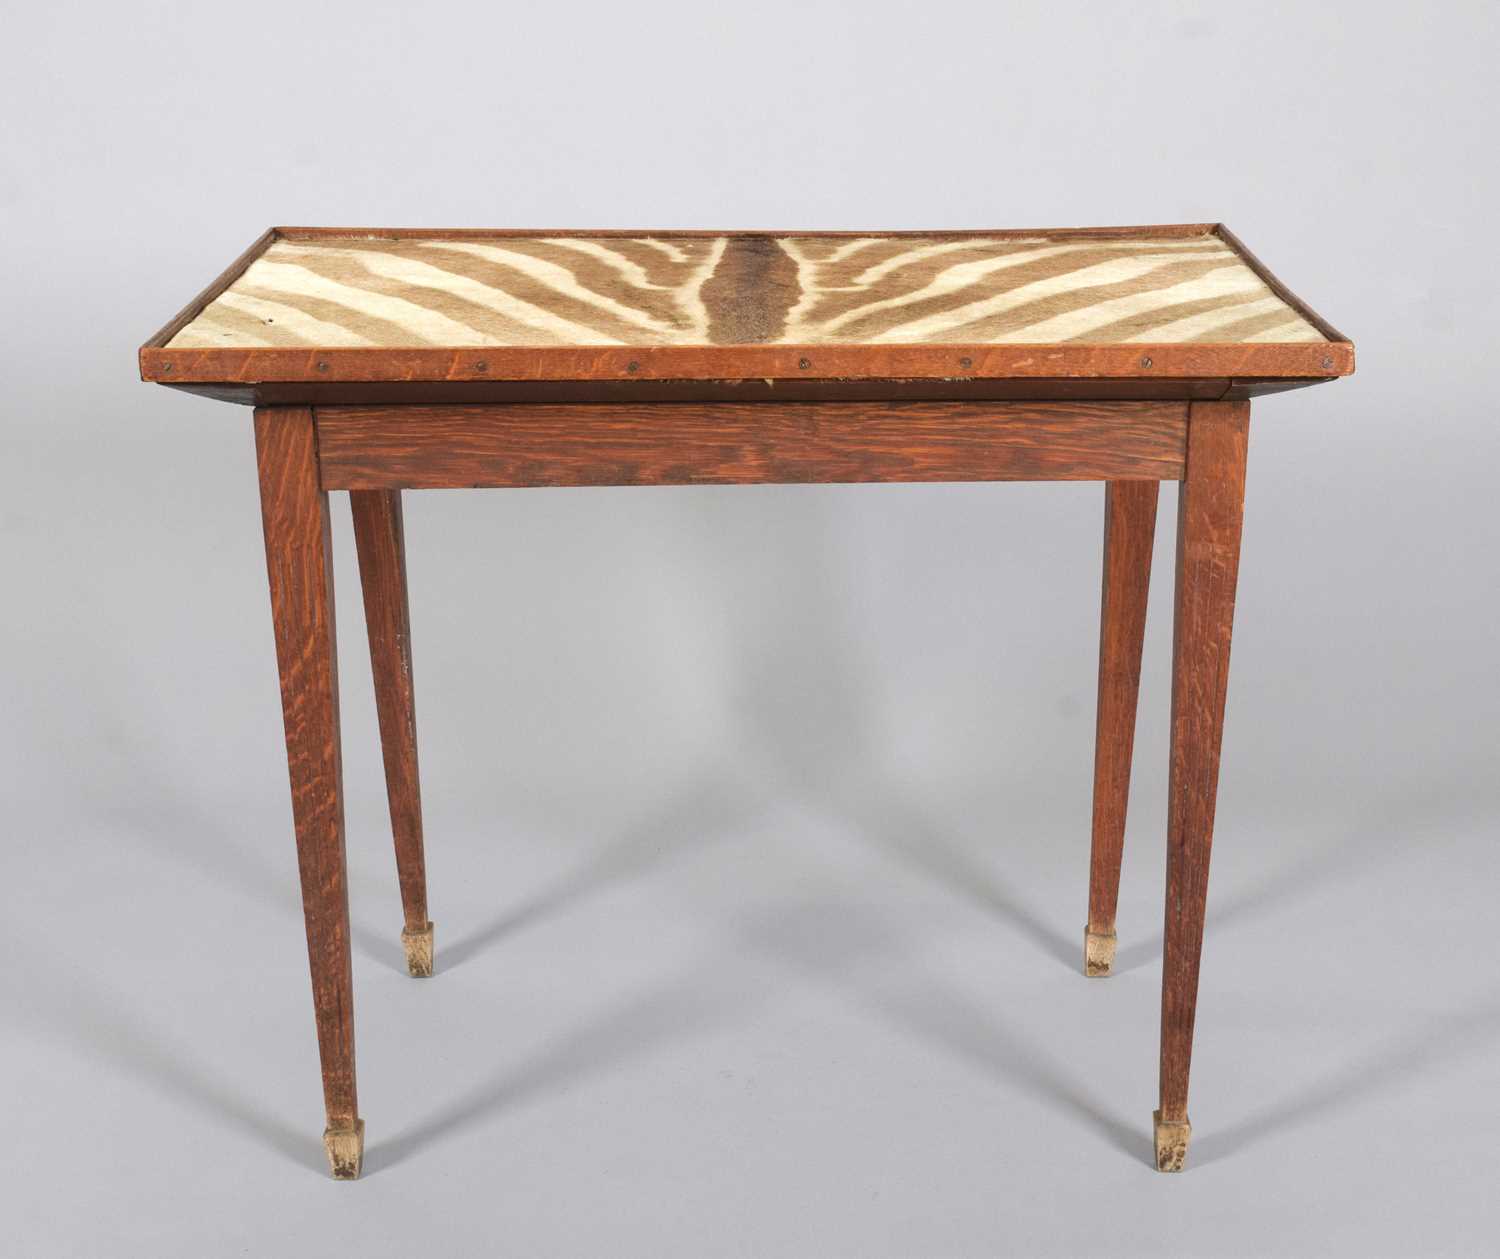 Animal Furniture: A Plains Zebra Hide Bridge Table, by Rowland Ward Ltd, 167 Piccadilly, London, the - Image 3 of 5